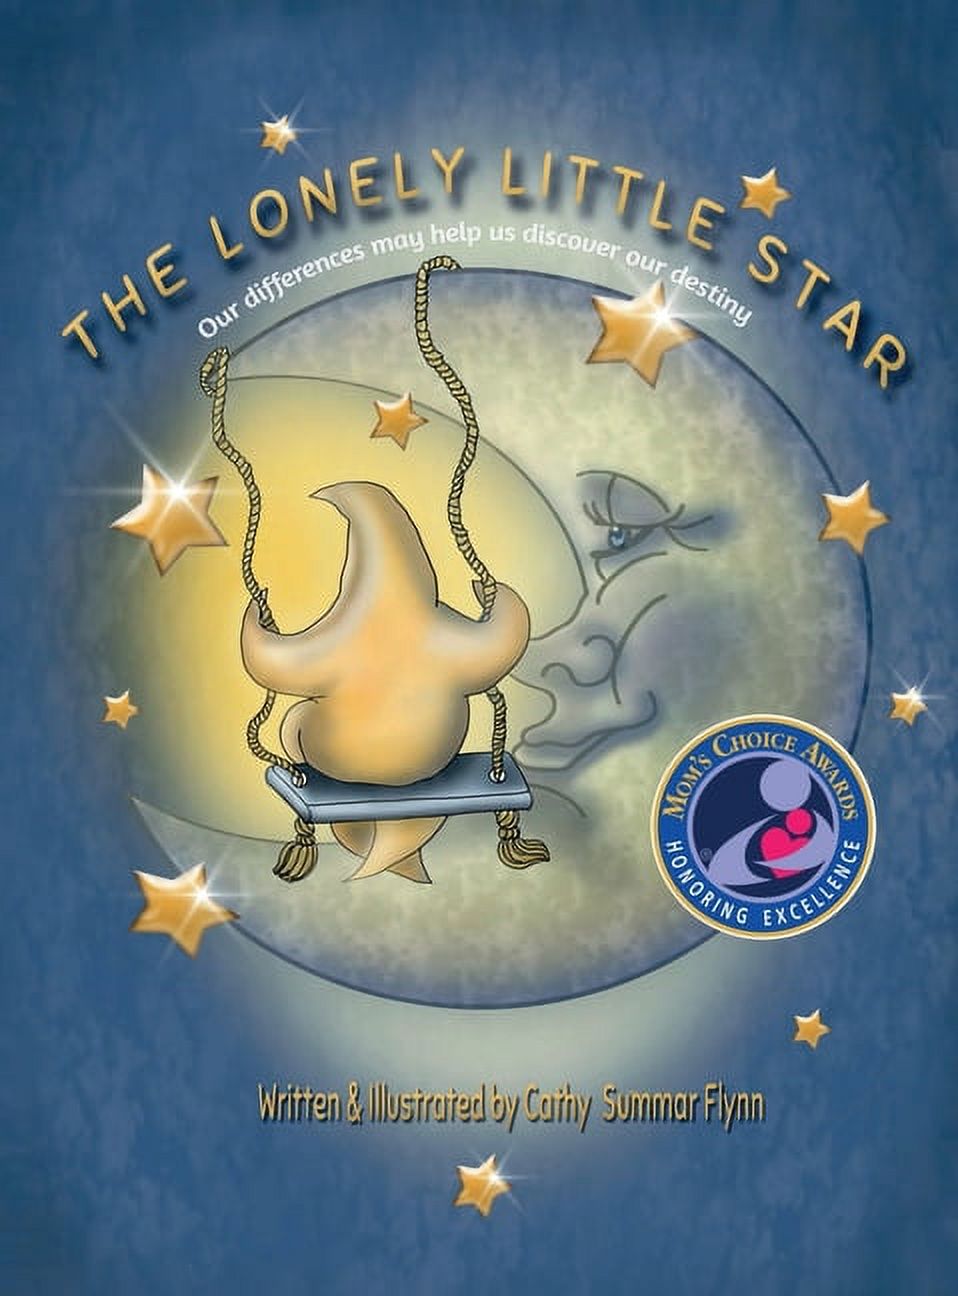 Lonely Little Star: The Lonely Little Star "Mom's Choice Awards Recipient" (Hardcover) - image 1 of 1